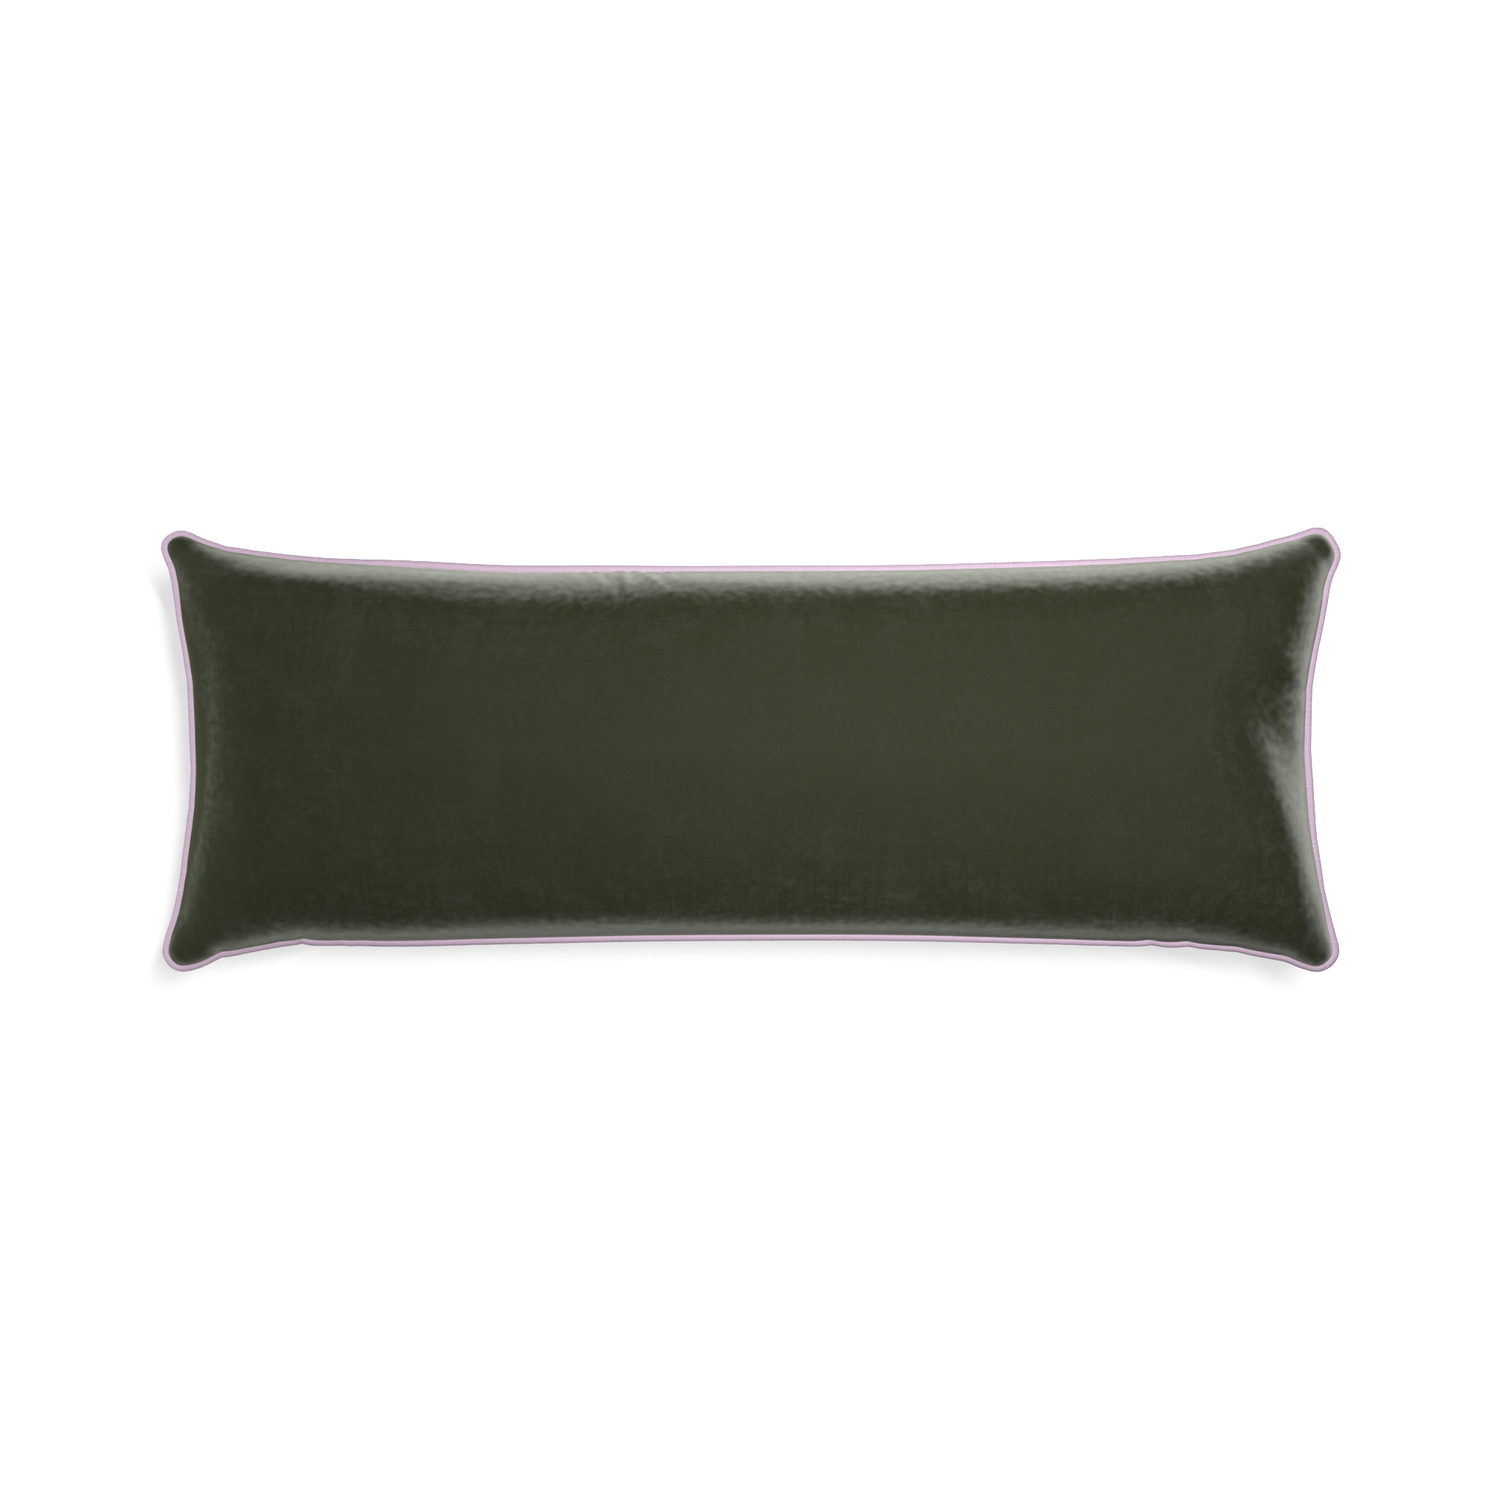 rectangle fern green velvet pillow with lilac piping